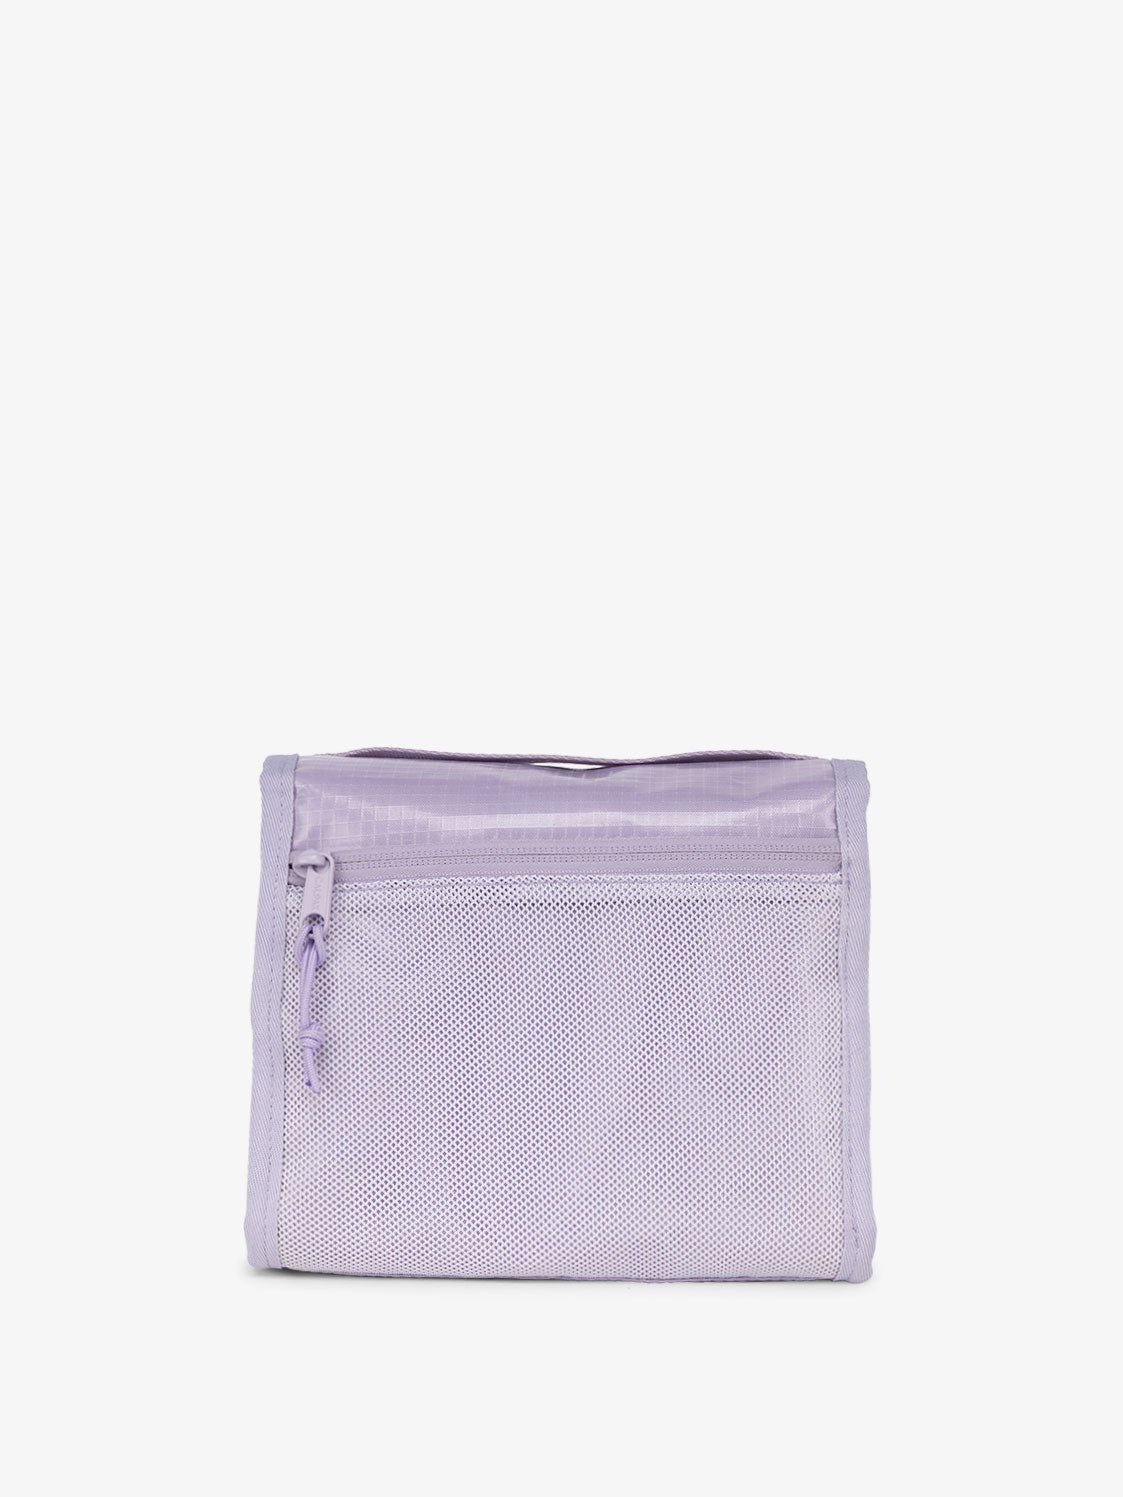 CALPAK Terra Hanging Toiletry Bag with water-resistant interior and multiple pockets in amethyst